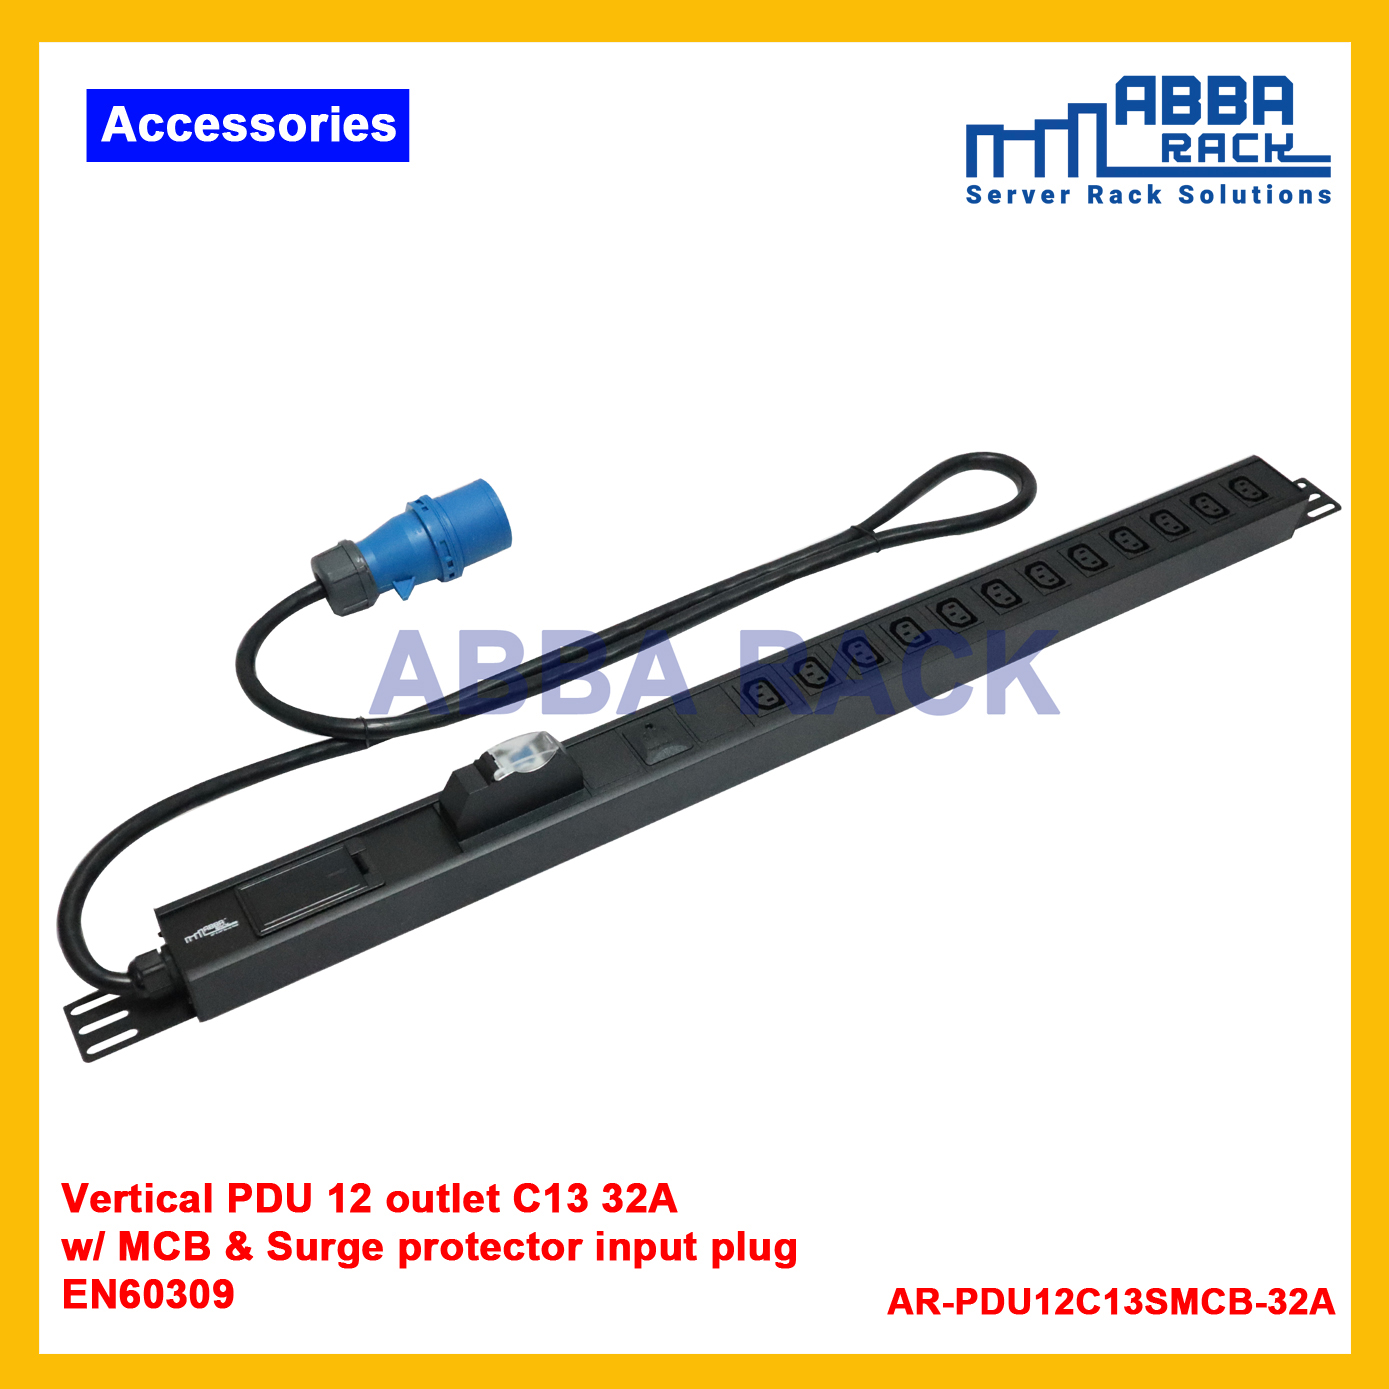 pdu with over load protection, distributor rack server